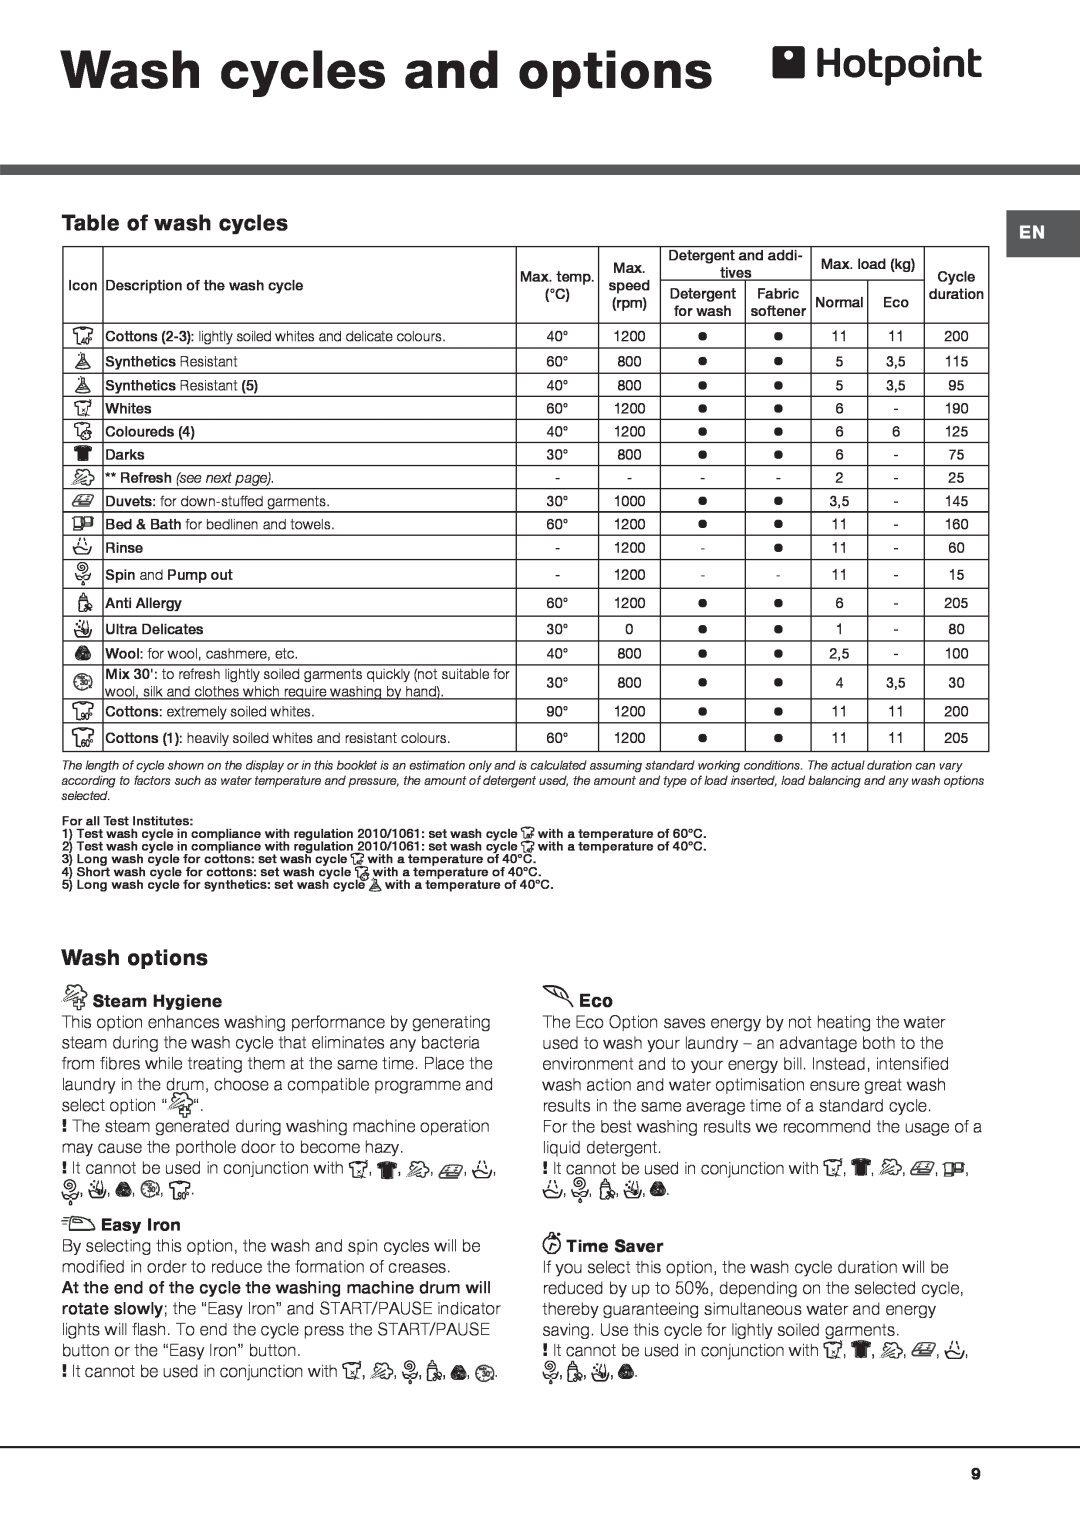 Hotpoint AQ113L 297 E manual Wash cycles and options, Table of wash cycles, Wash options 